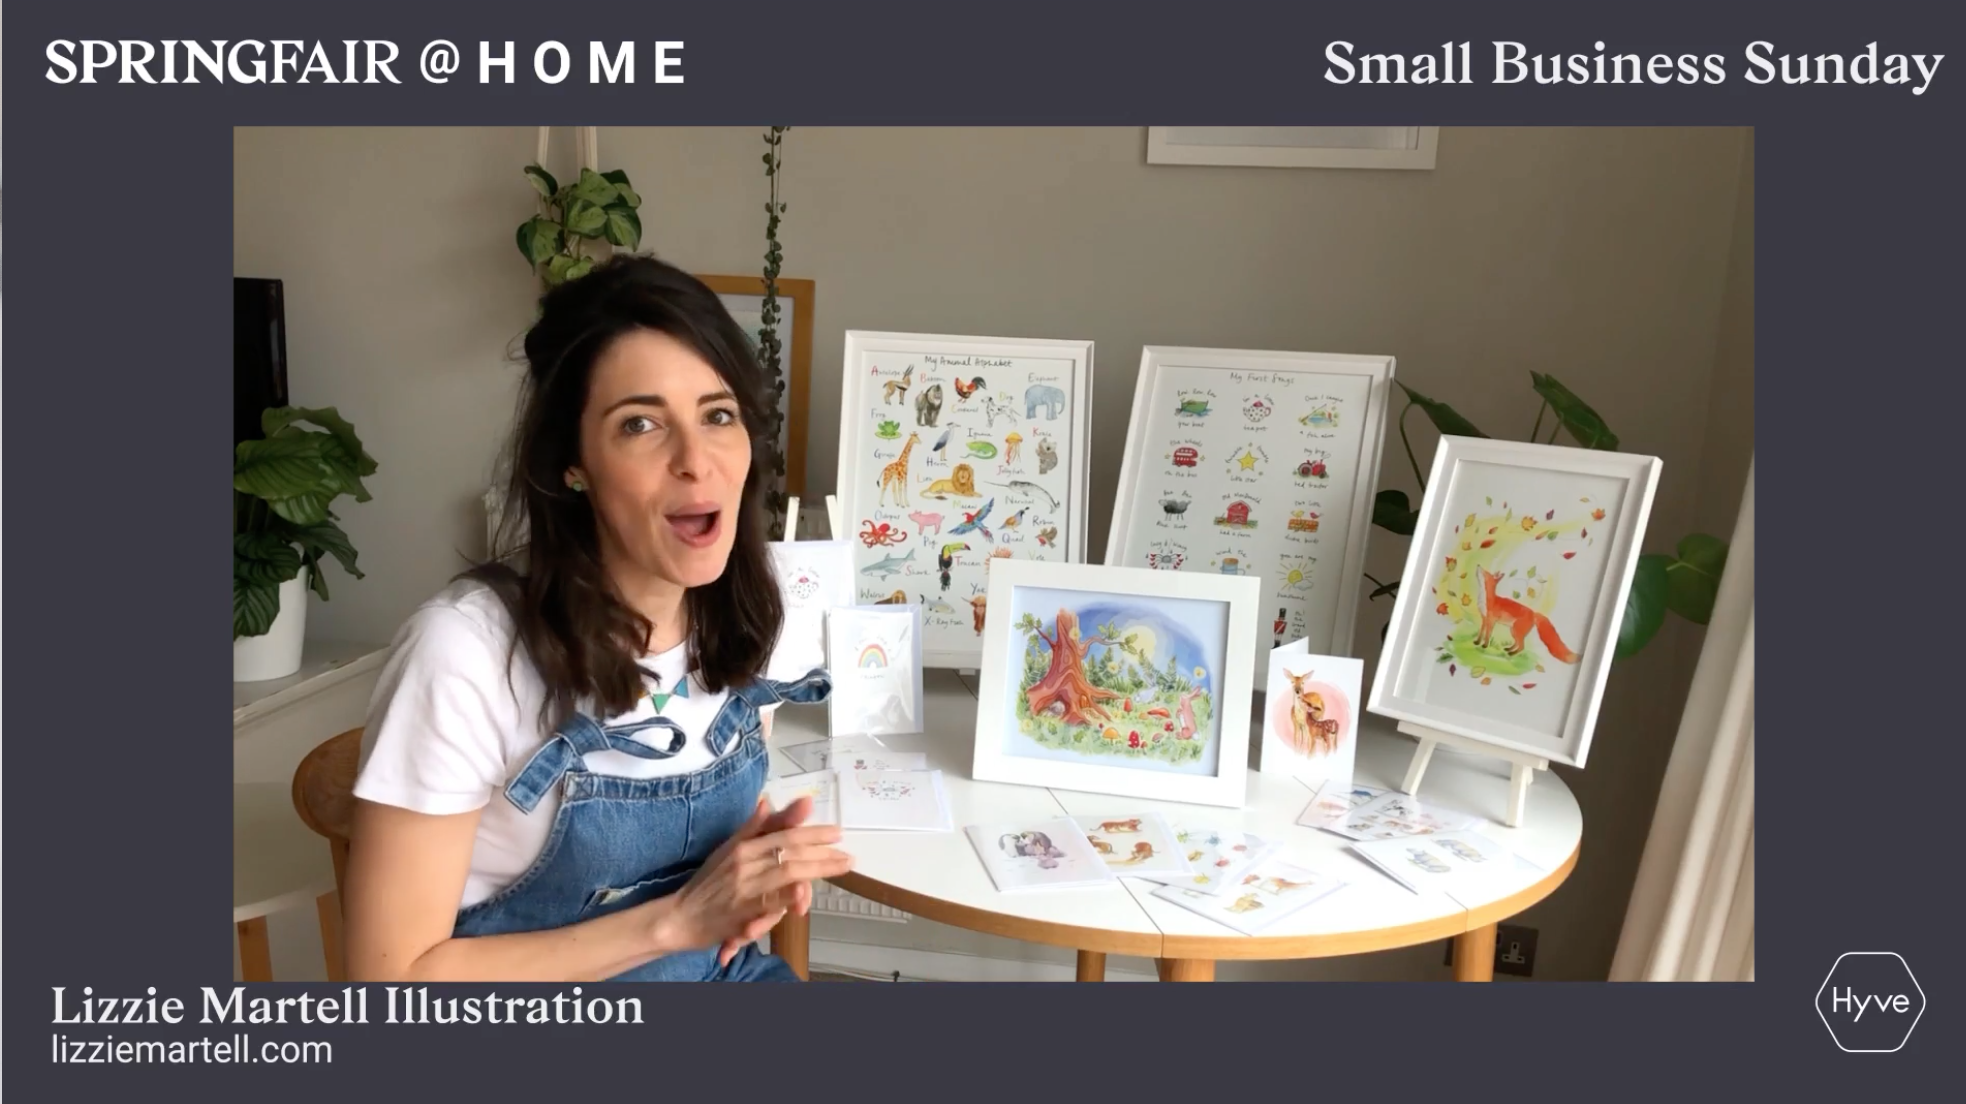 Above: After the keynote, the Spring Fair@Home showcased some of the businesses which have been promoted by Theo’s Small Business Sunday, when he retweets some of his fave submissions from SME. These include Lizie Martell Illustration whose product range includes greeting cards.